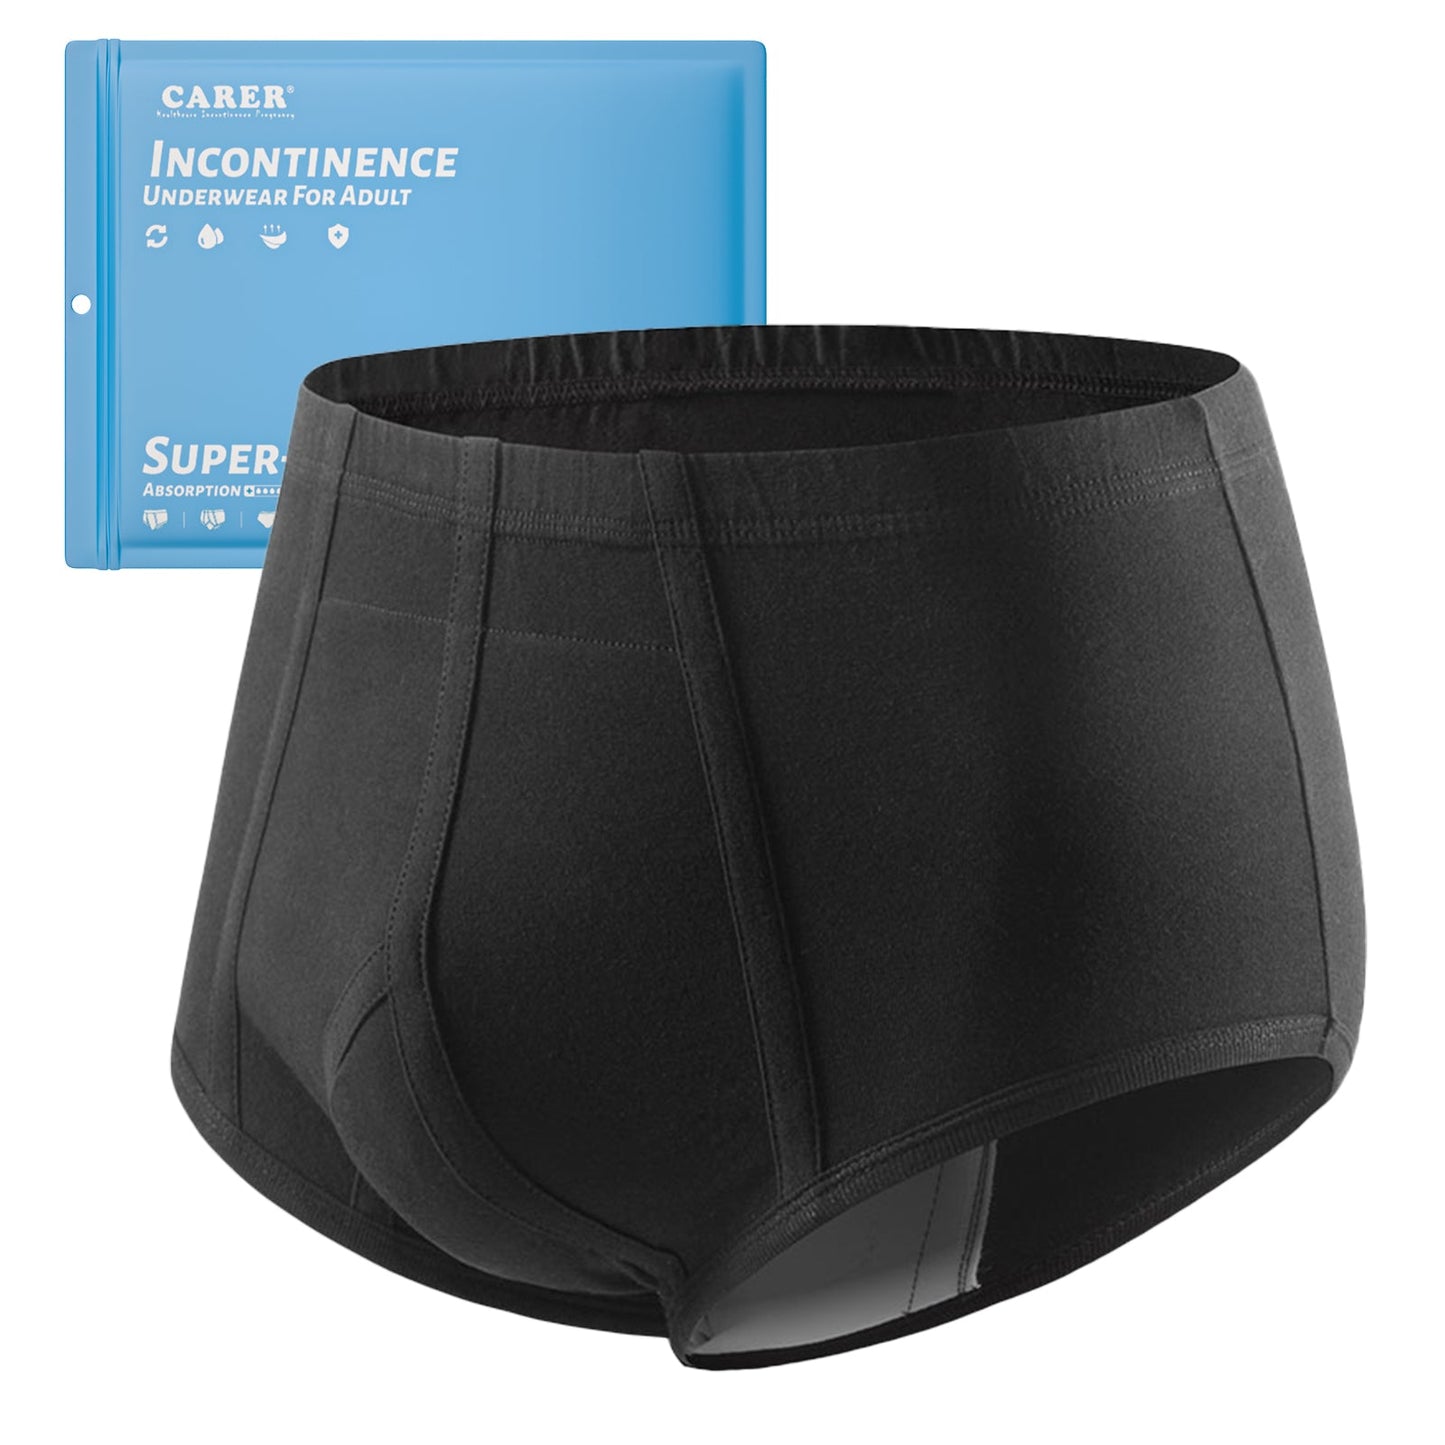 Incontinence Pants for Men, Incontinence Care